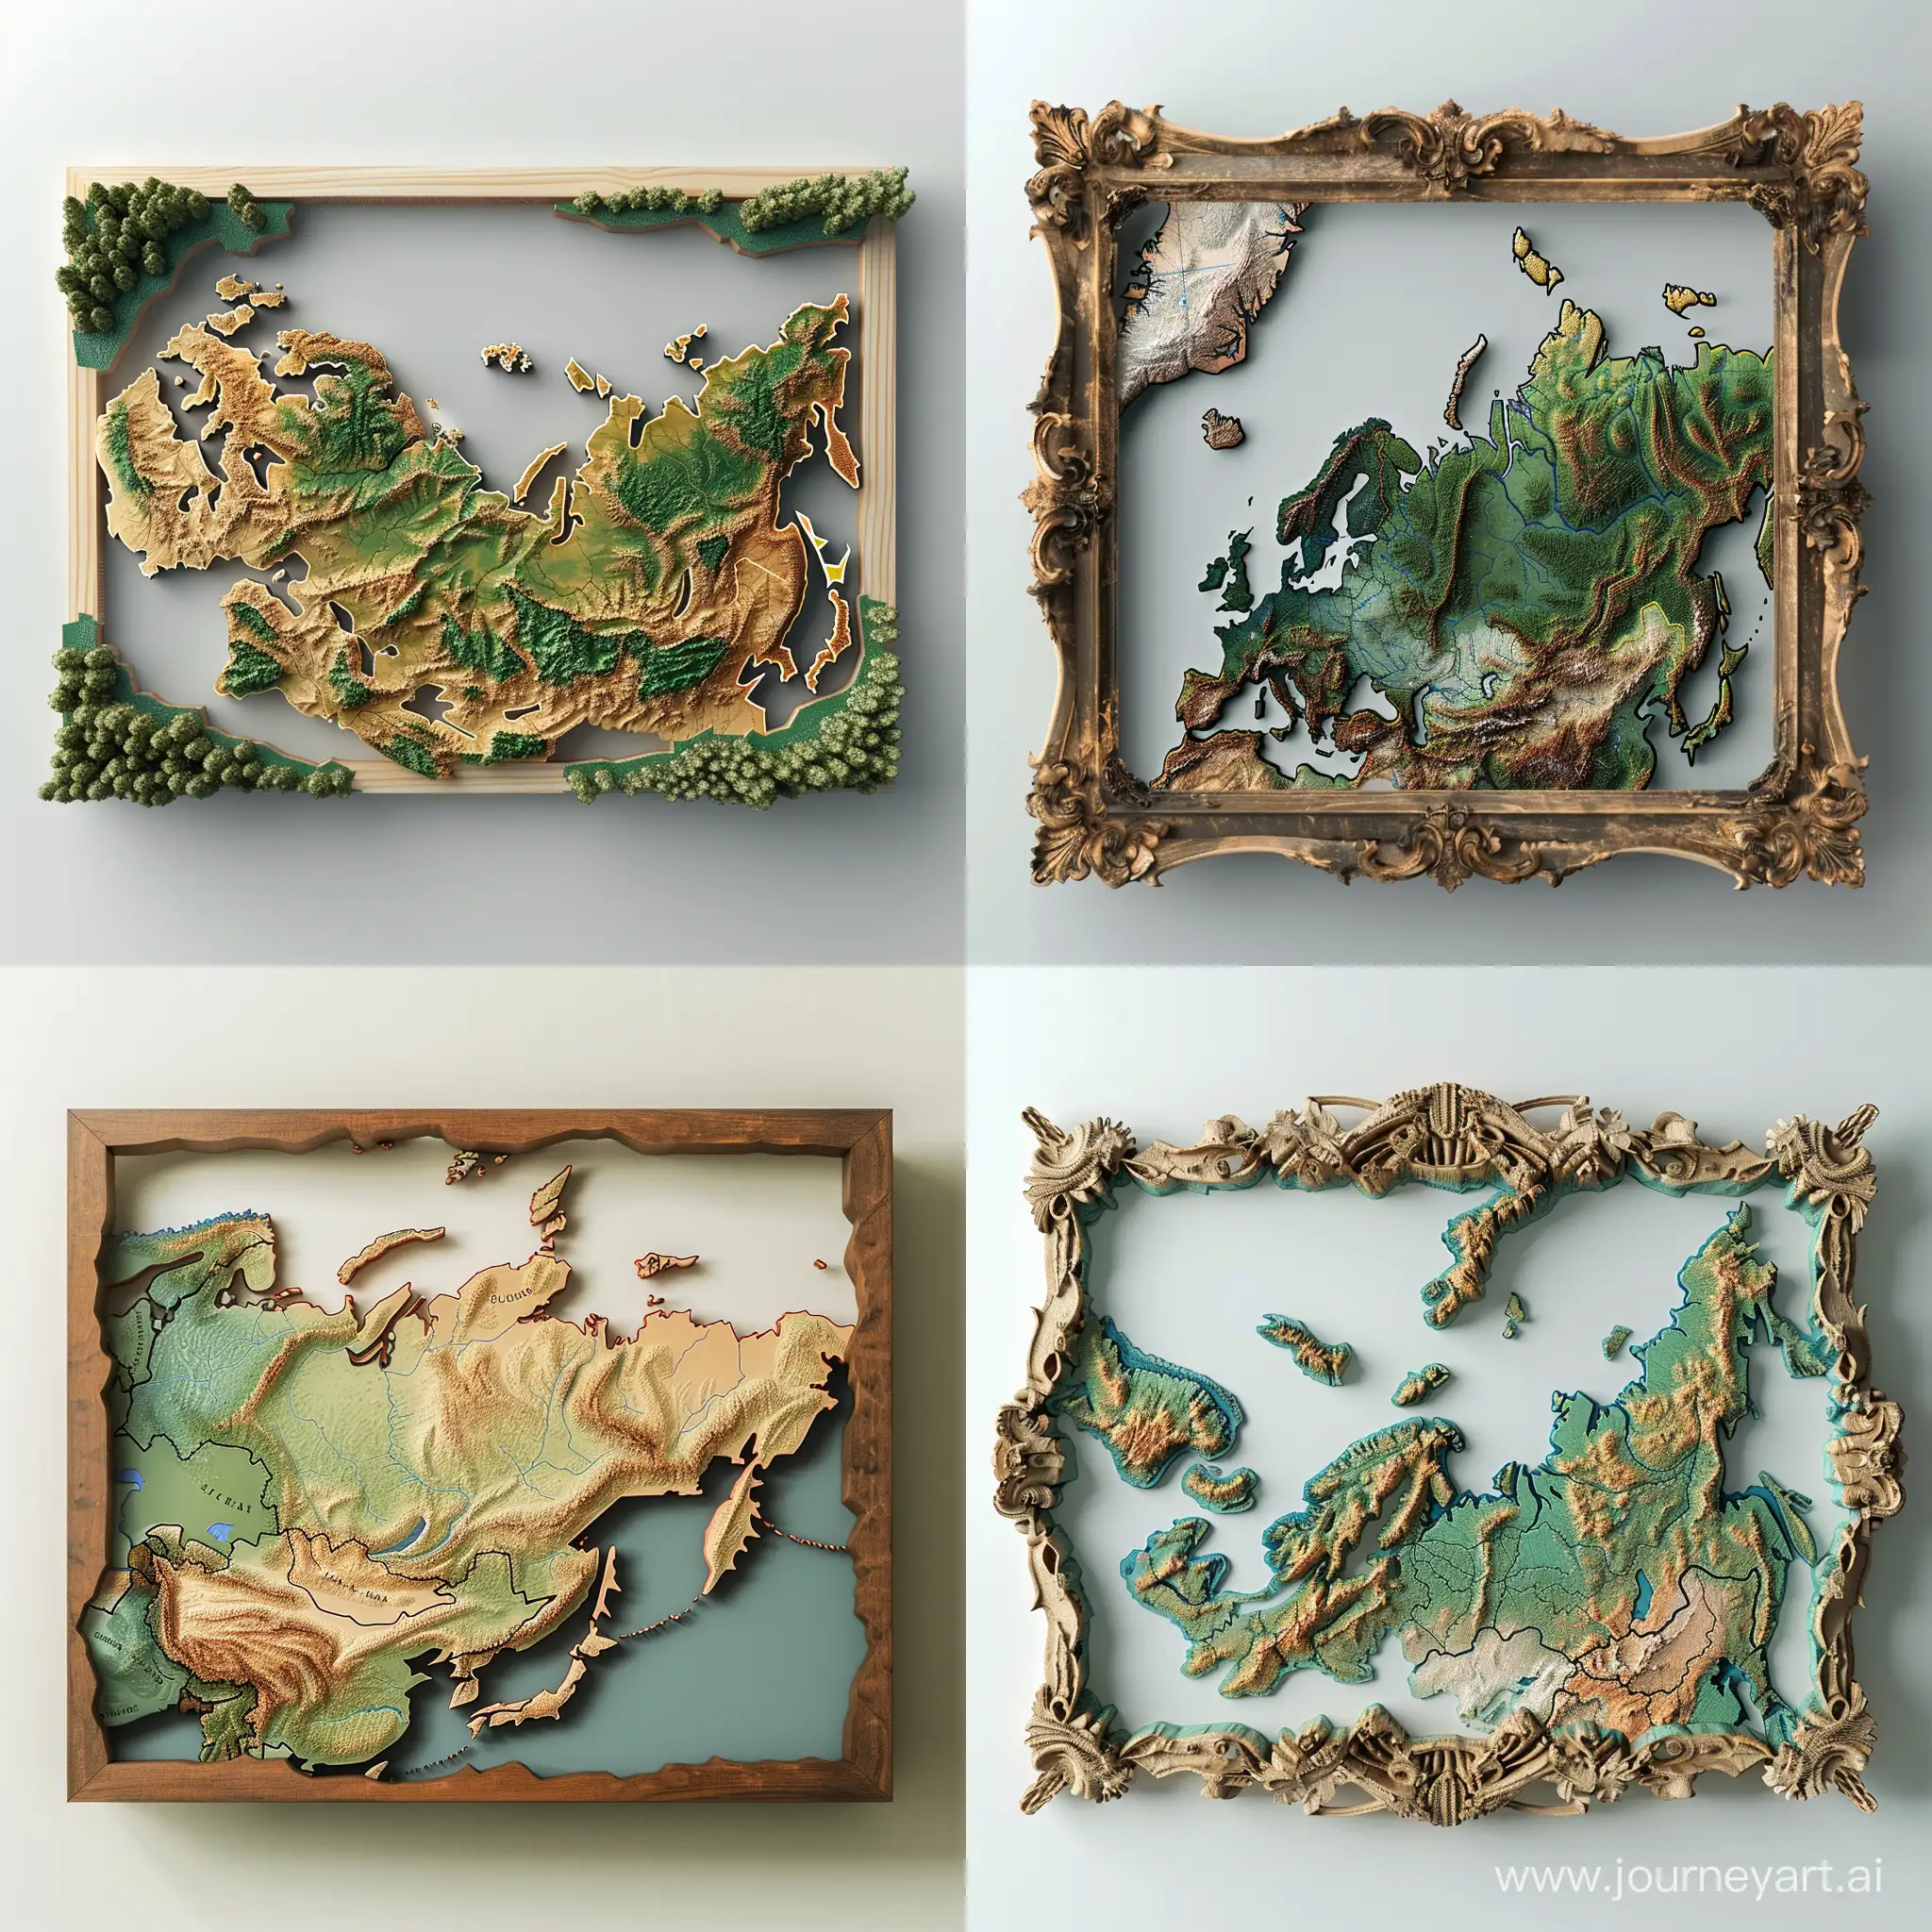 Top-View-3D-Map-of-Russia-in-Intricate-6Frame-Composition